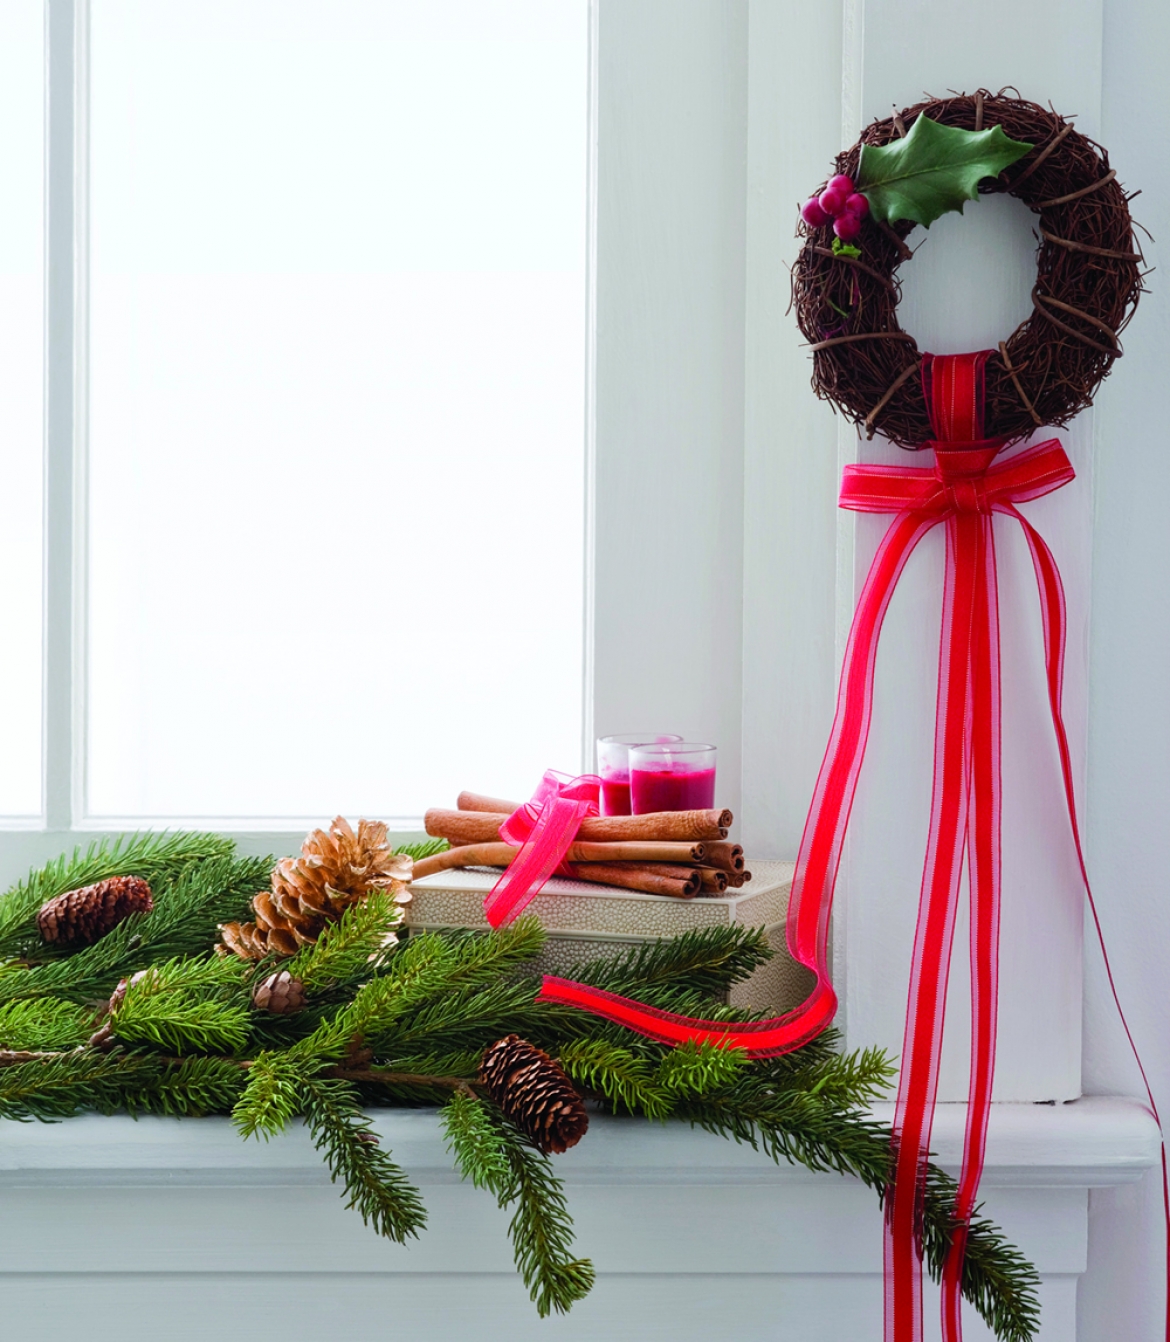 Simple Ways to Dress Up Your Home for the Holidays | GraFitz Group Advertising Agency